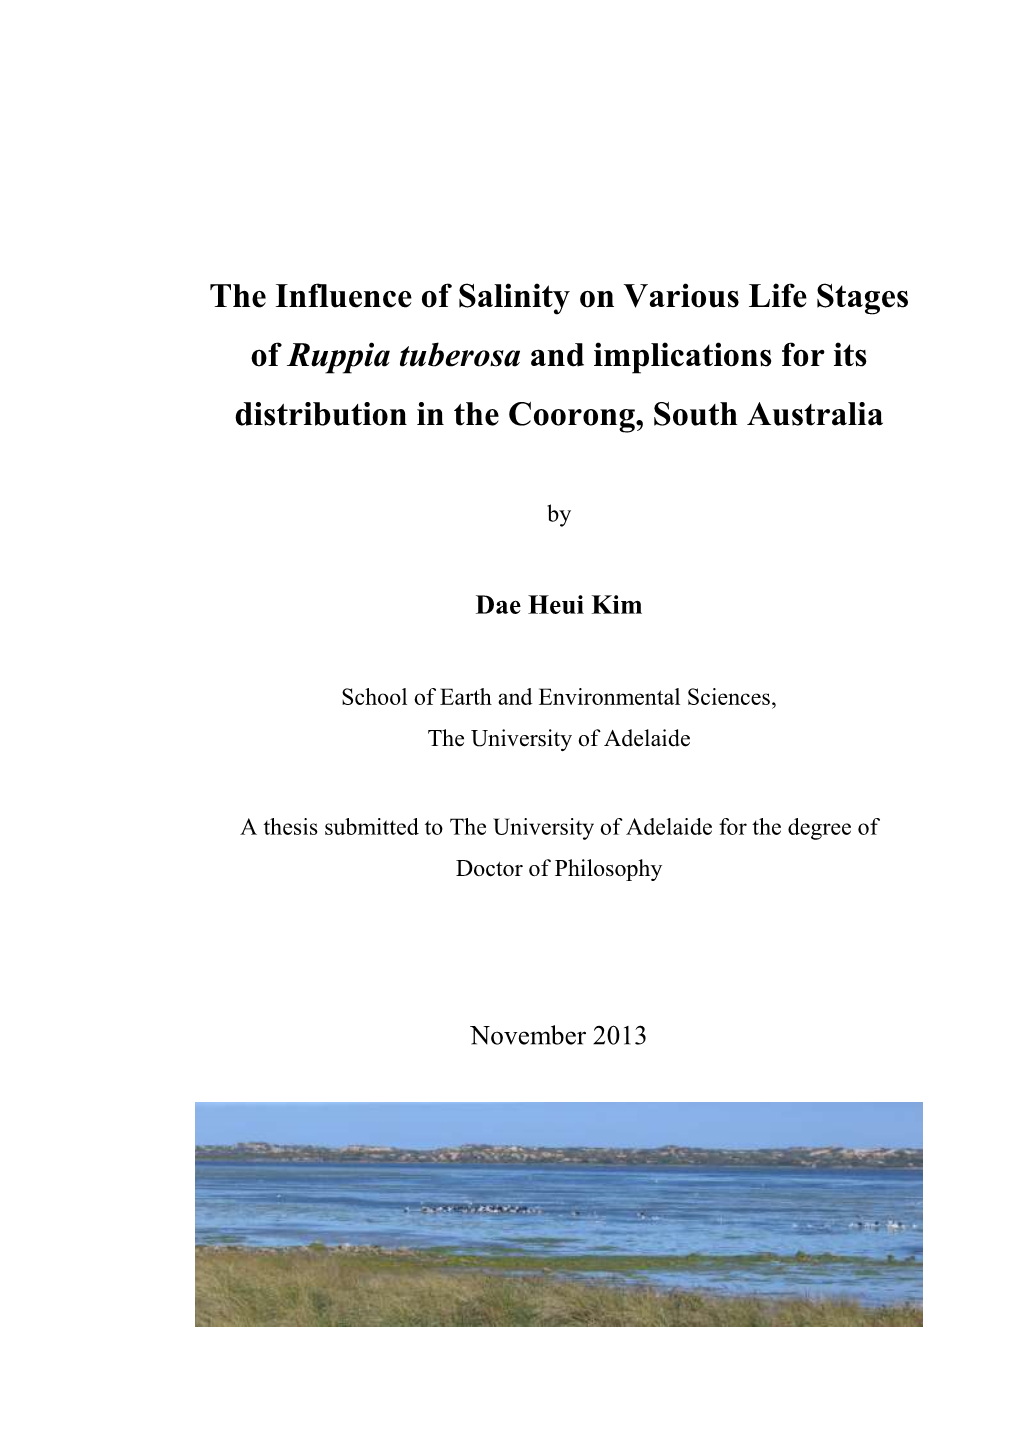 The Influence of Salinity on Various Life Stages of Ruppia Tuberosa and Implications for Its Distribution in the Coorong, South Australia